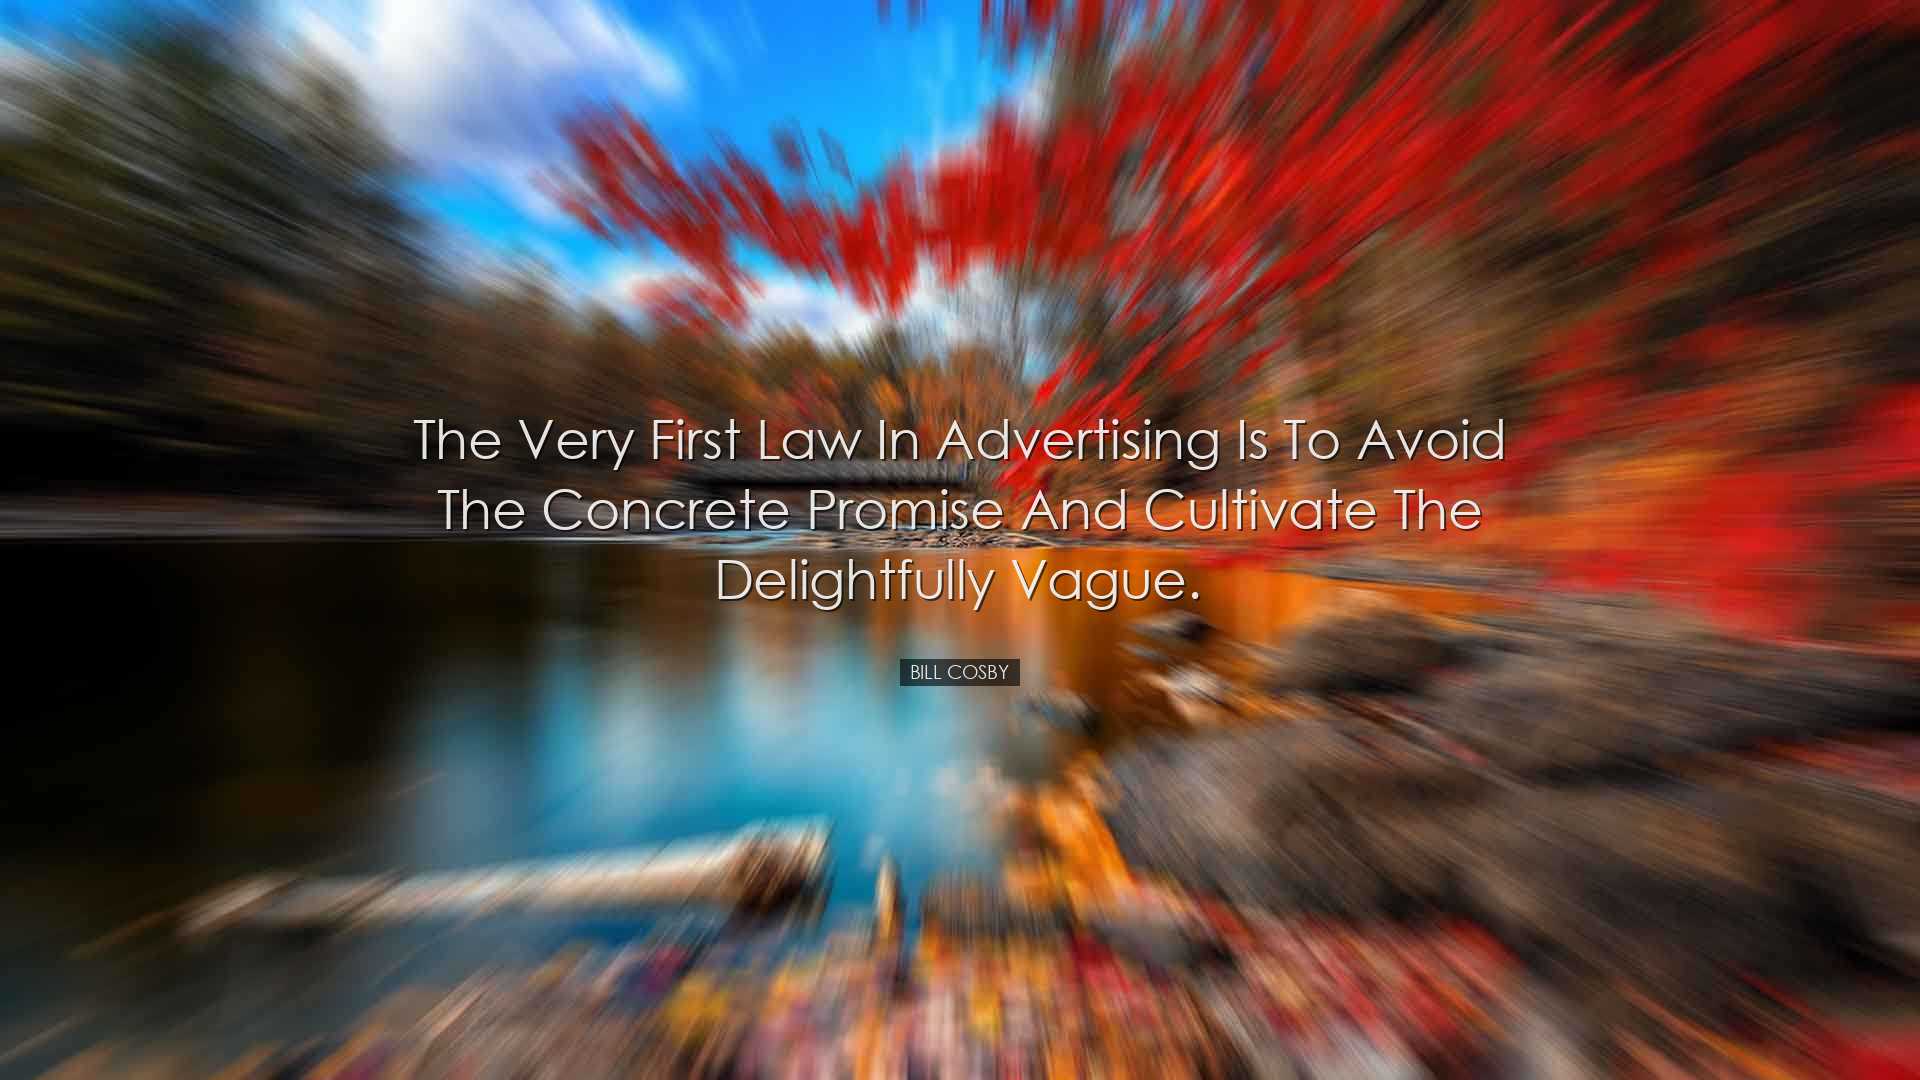 The very first law in advertising is to avoid the concrete promise